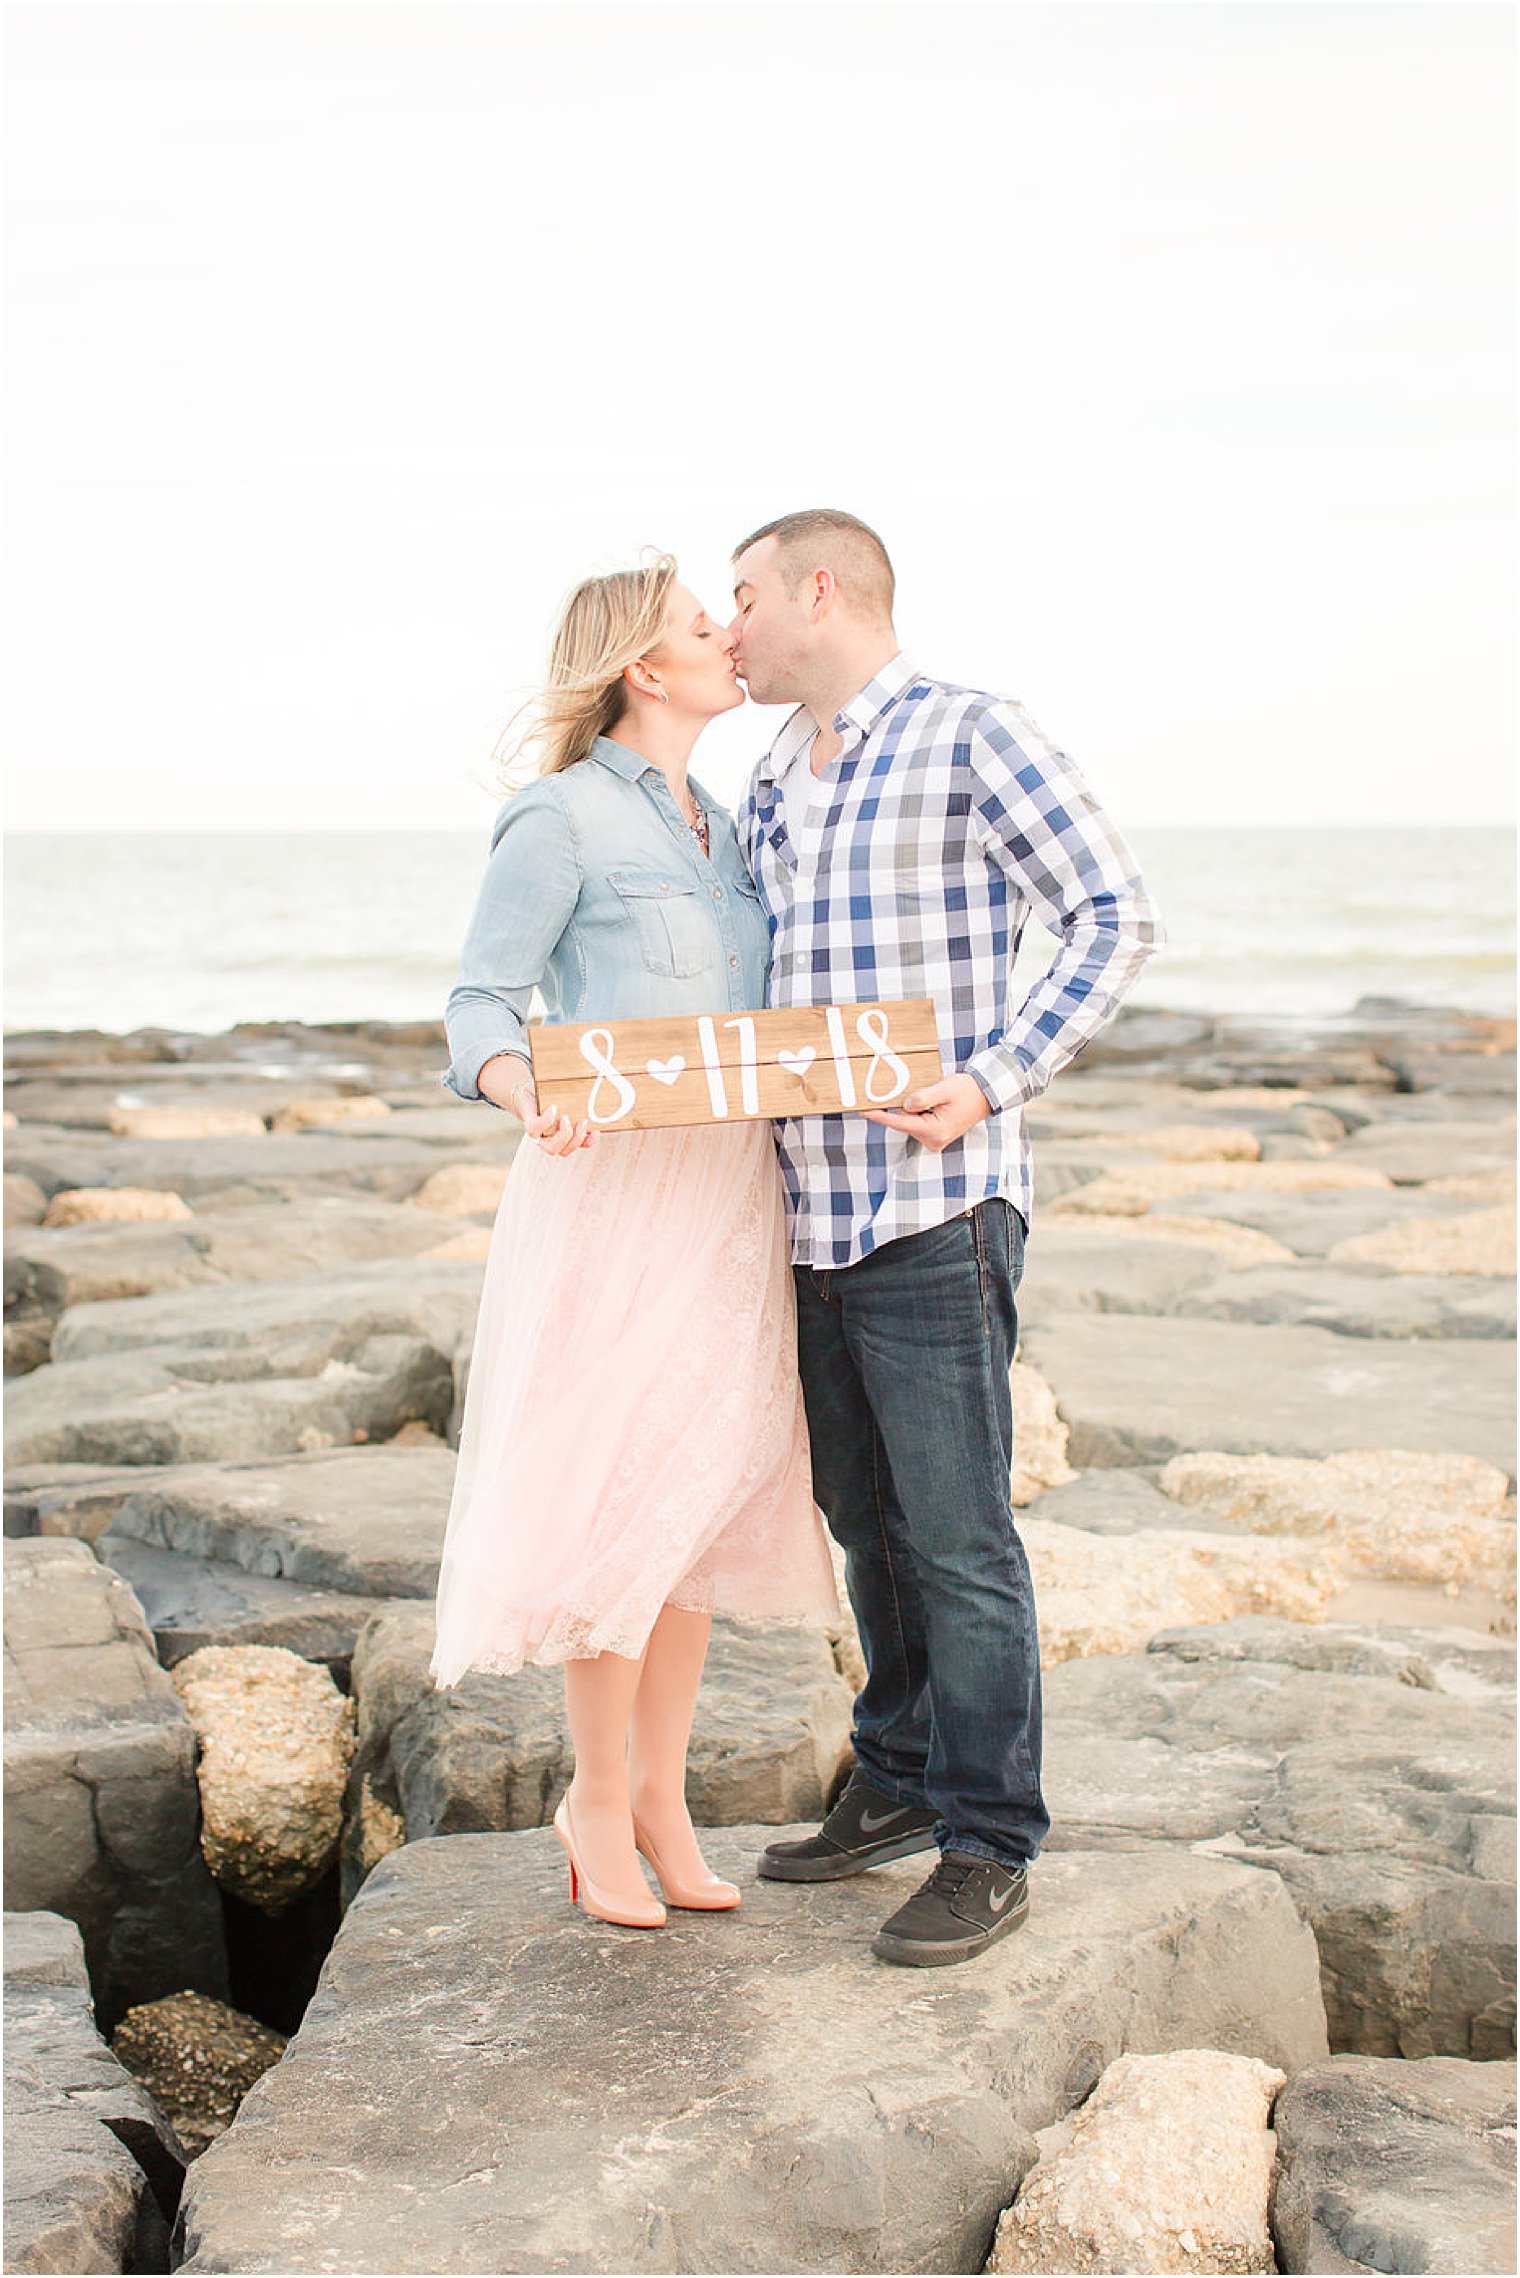 engaged couple stands on rocks at beach holding wooden sign